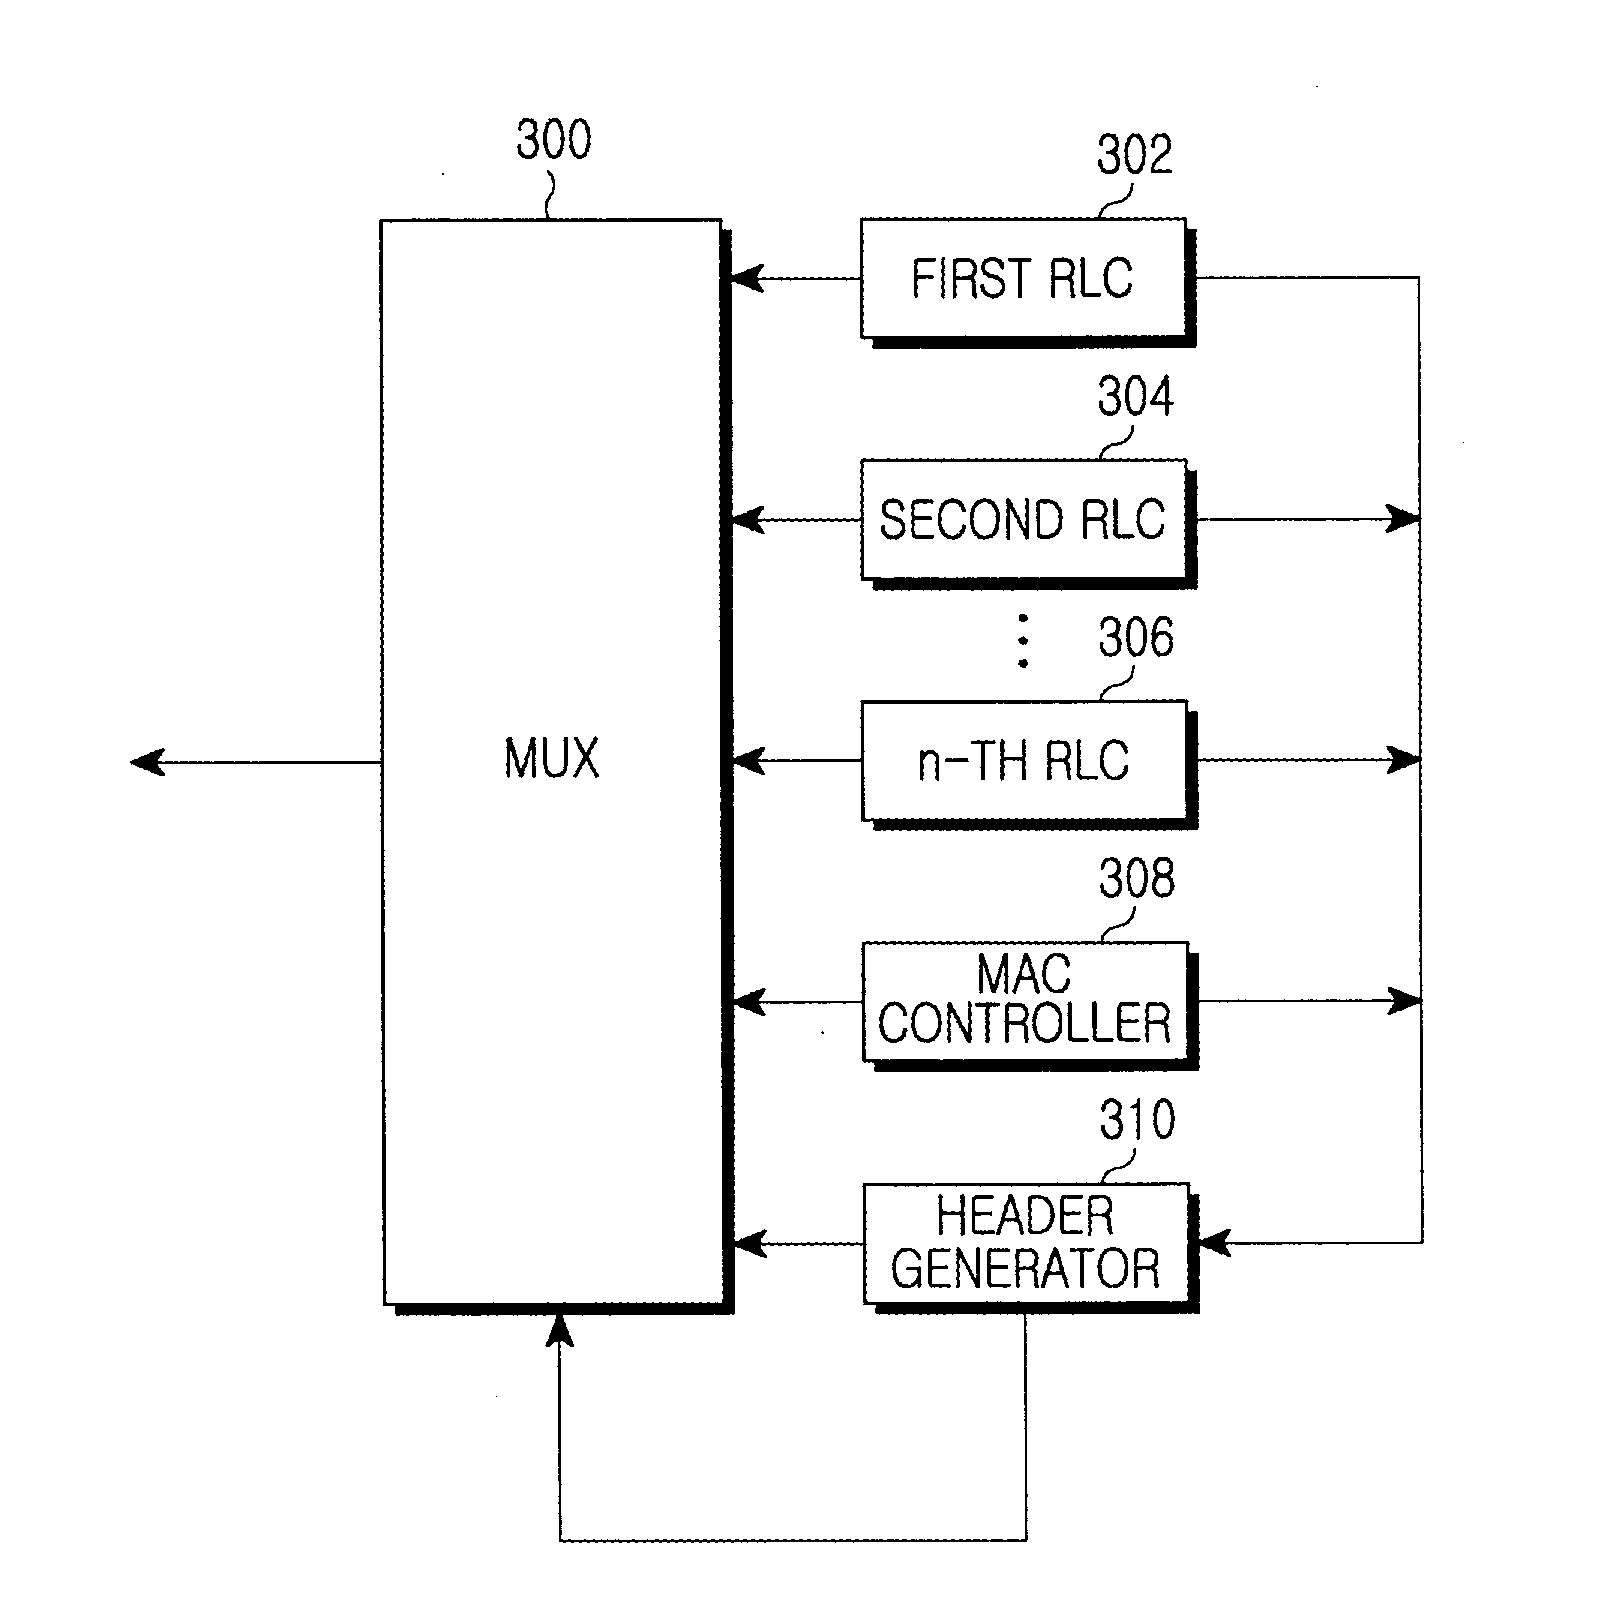 Apparatus and method for generating and parsing mac pdu in a mobile communication system